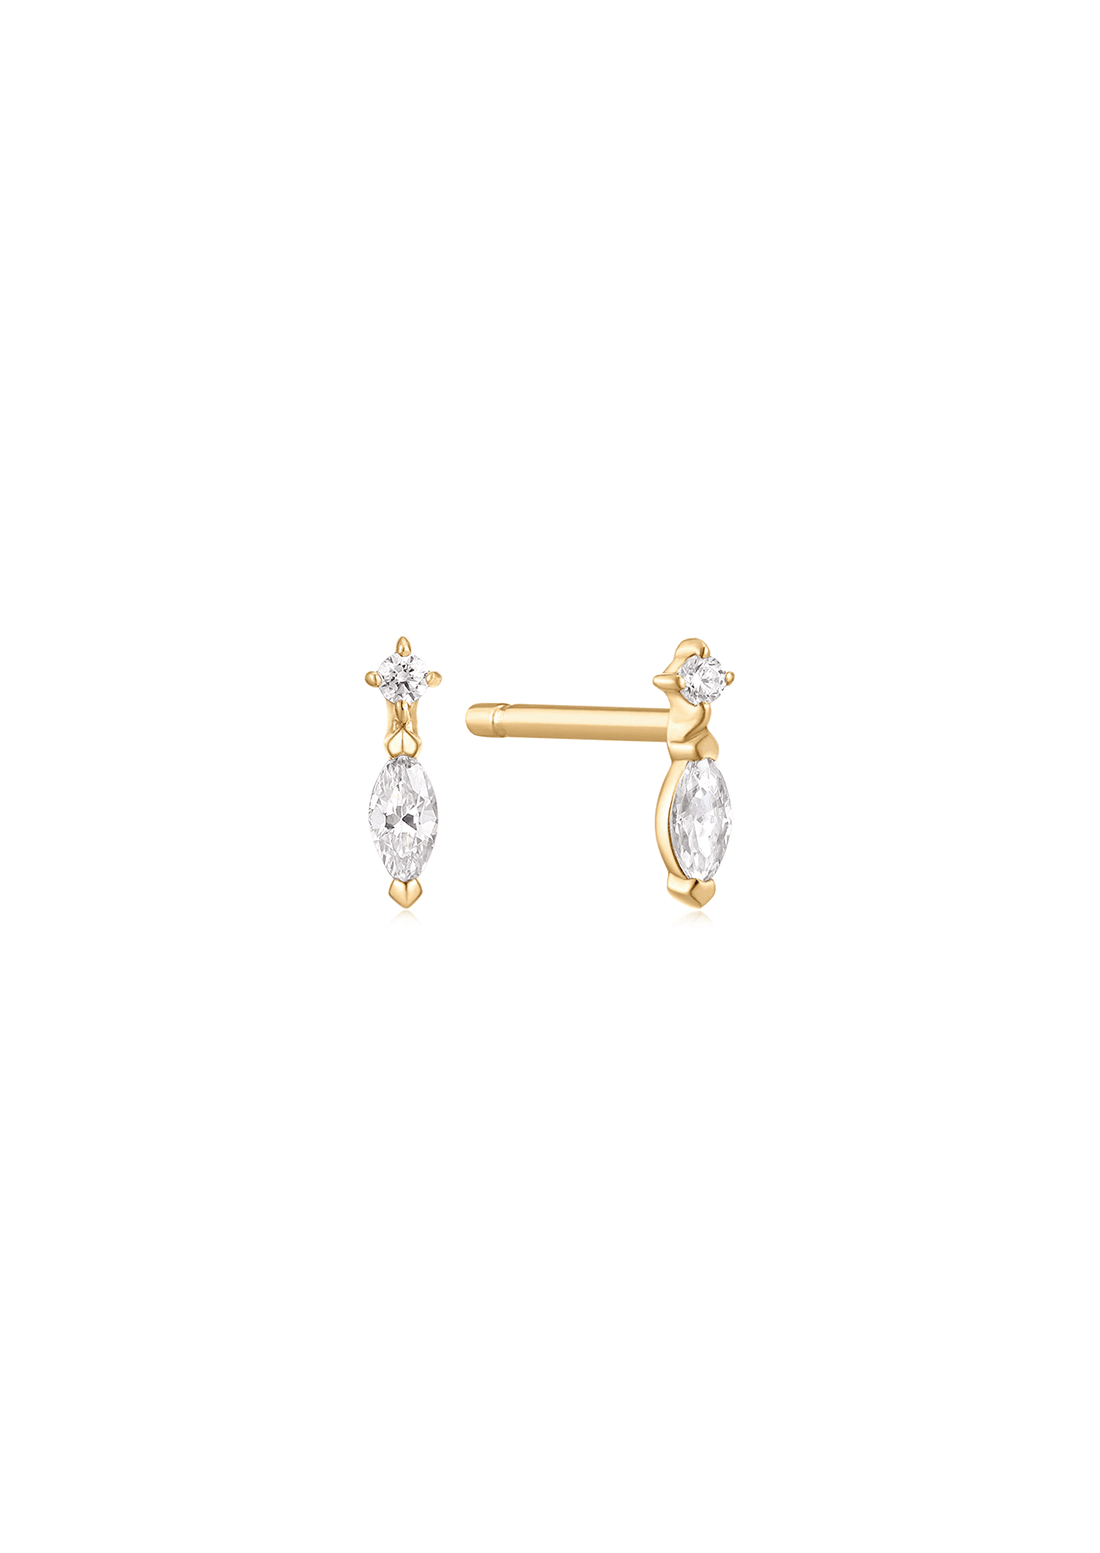 The Solstice Cultured Diamond 9ct Solid Gold Stud Earrings (Pair) - Molten Store